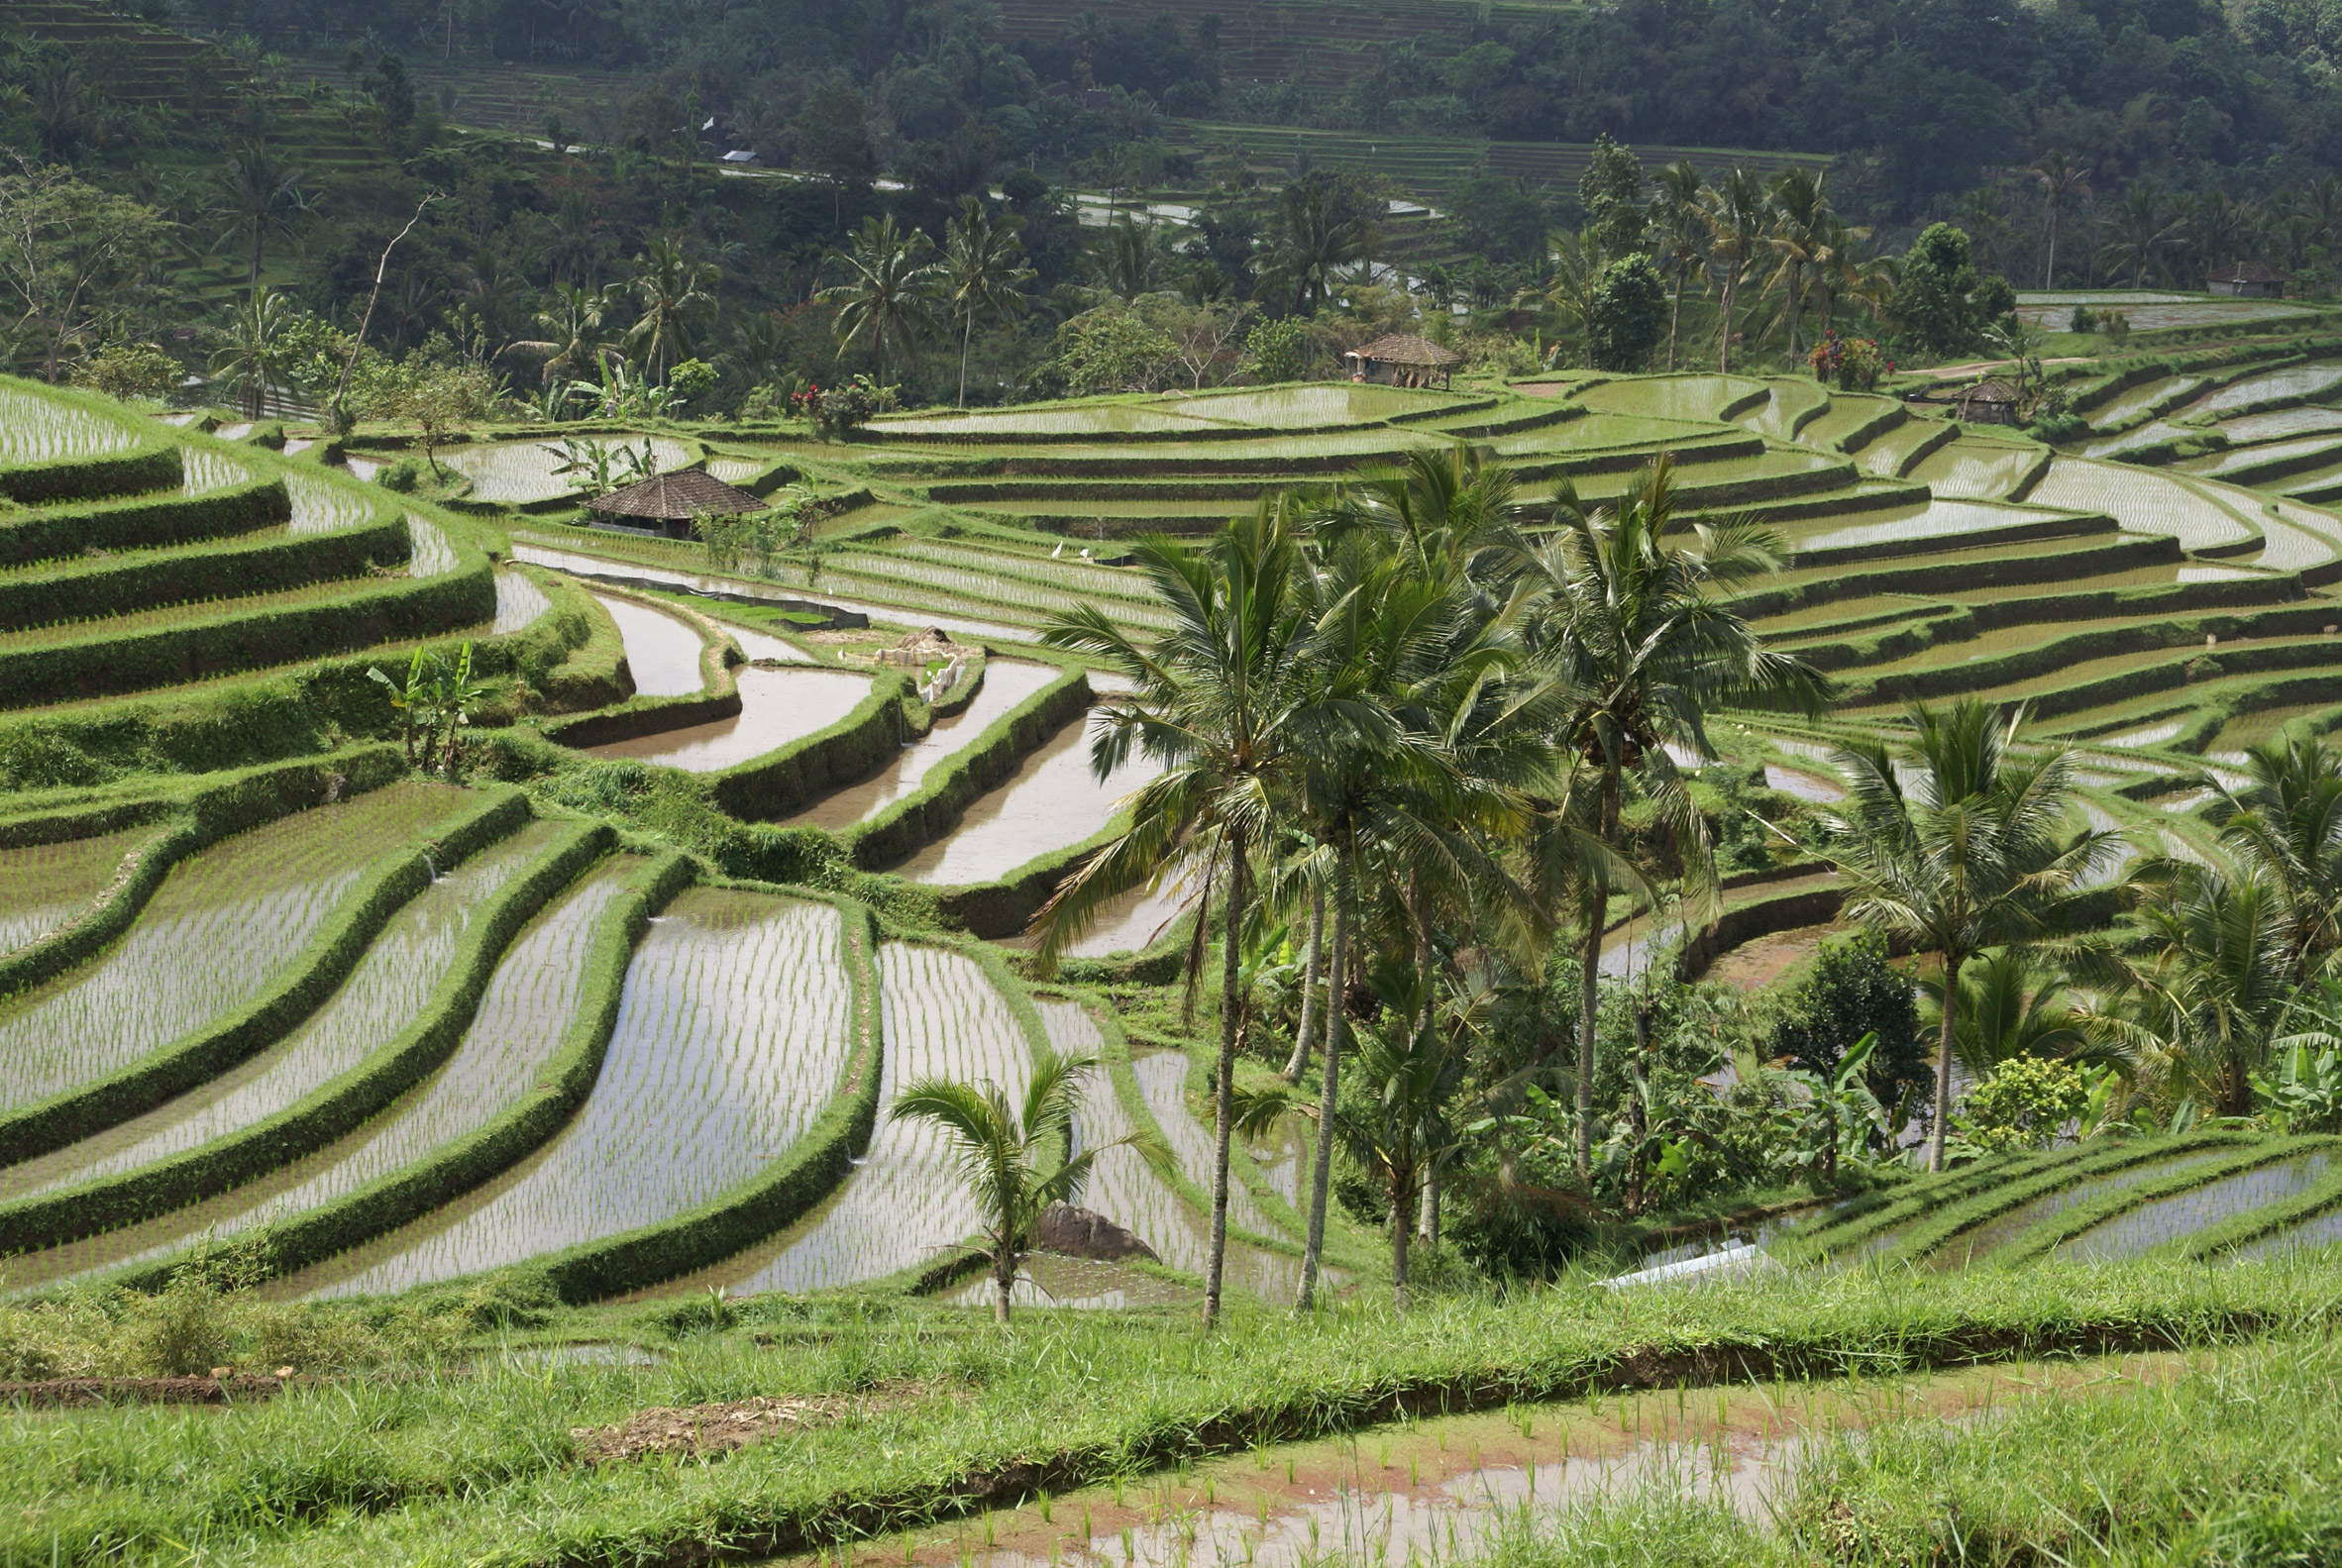 Image of rice paddies in Indonesia